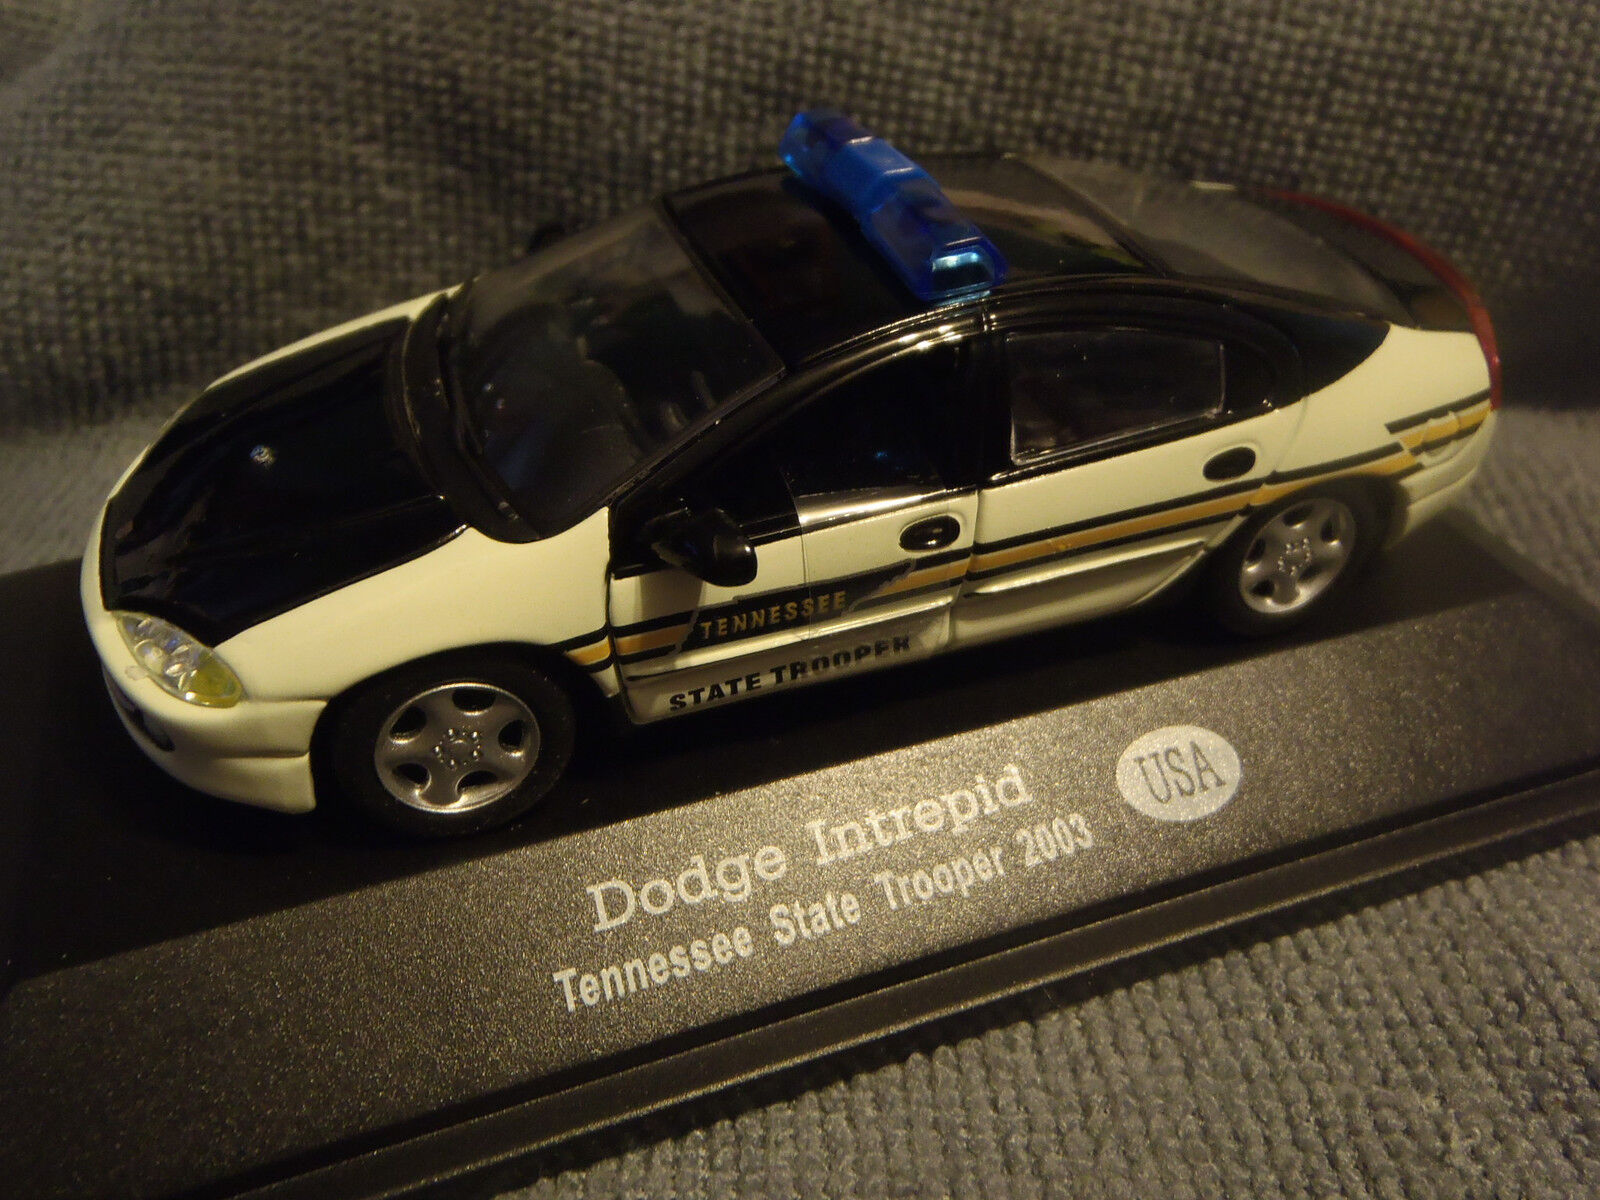 Police Car USA Tennessee 2003 Dodge Intrepid State Trooper 1-43 New Old  Stock | eBay